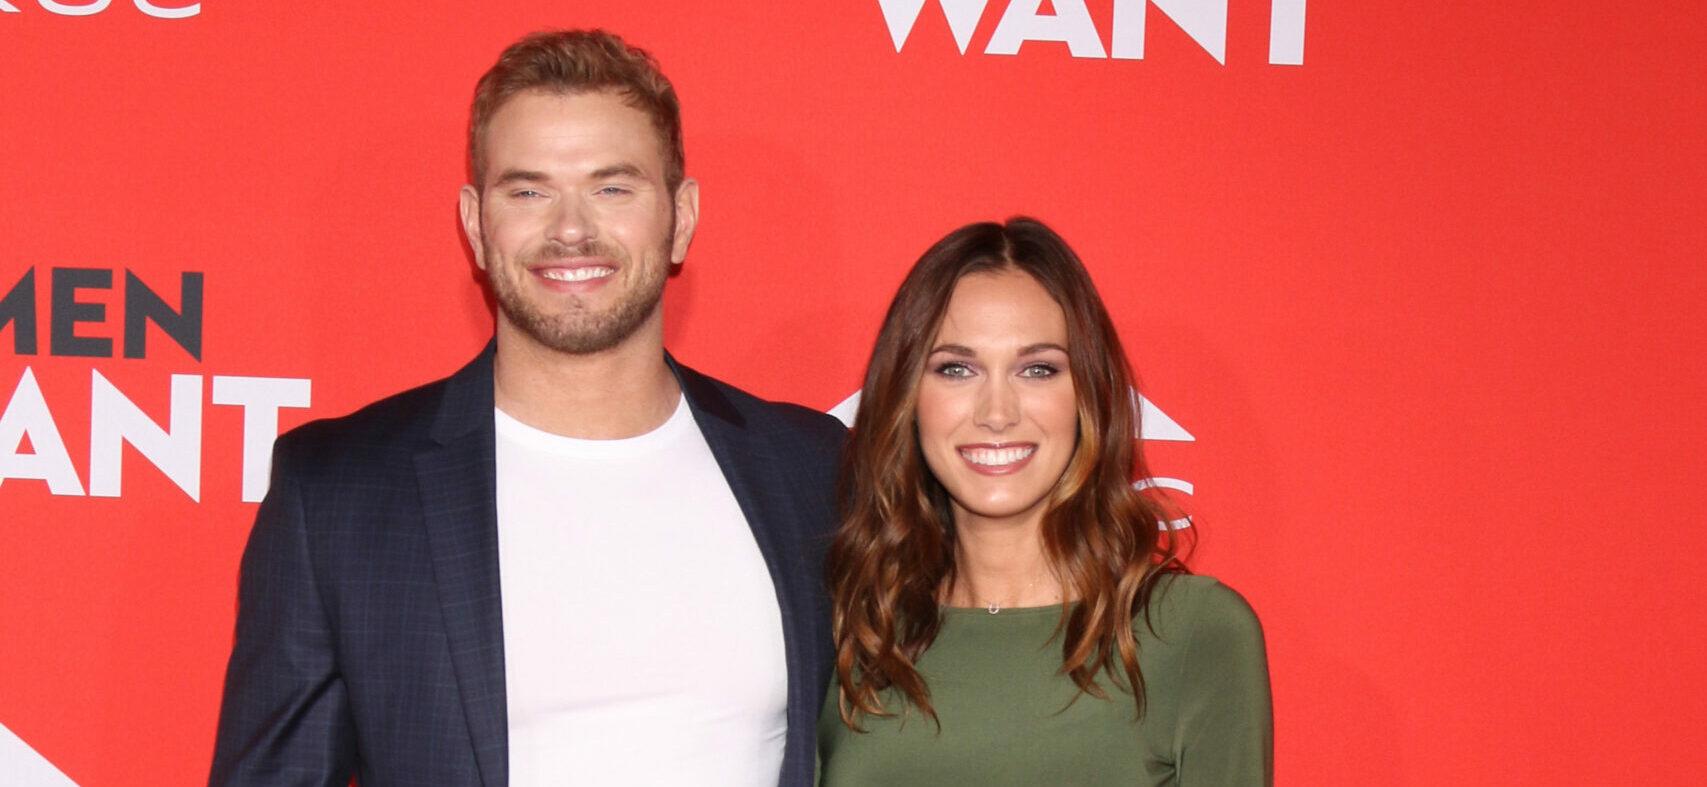 LOS ANGELES - JAN 28: Kellan Lutz, Brittany Gonzales at the "What Men Want" Premiere at the Village Theater on January 28, 2019 in Westwood, CA